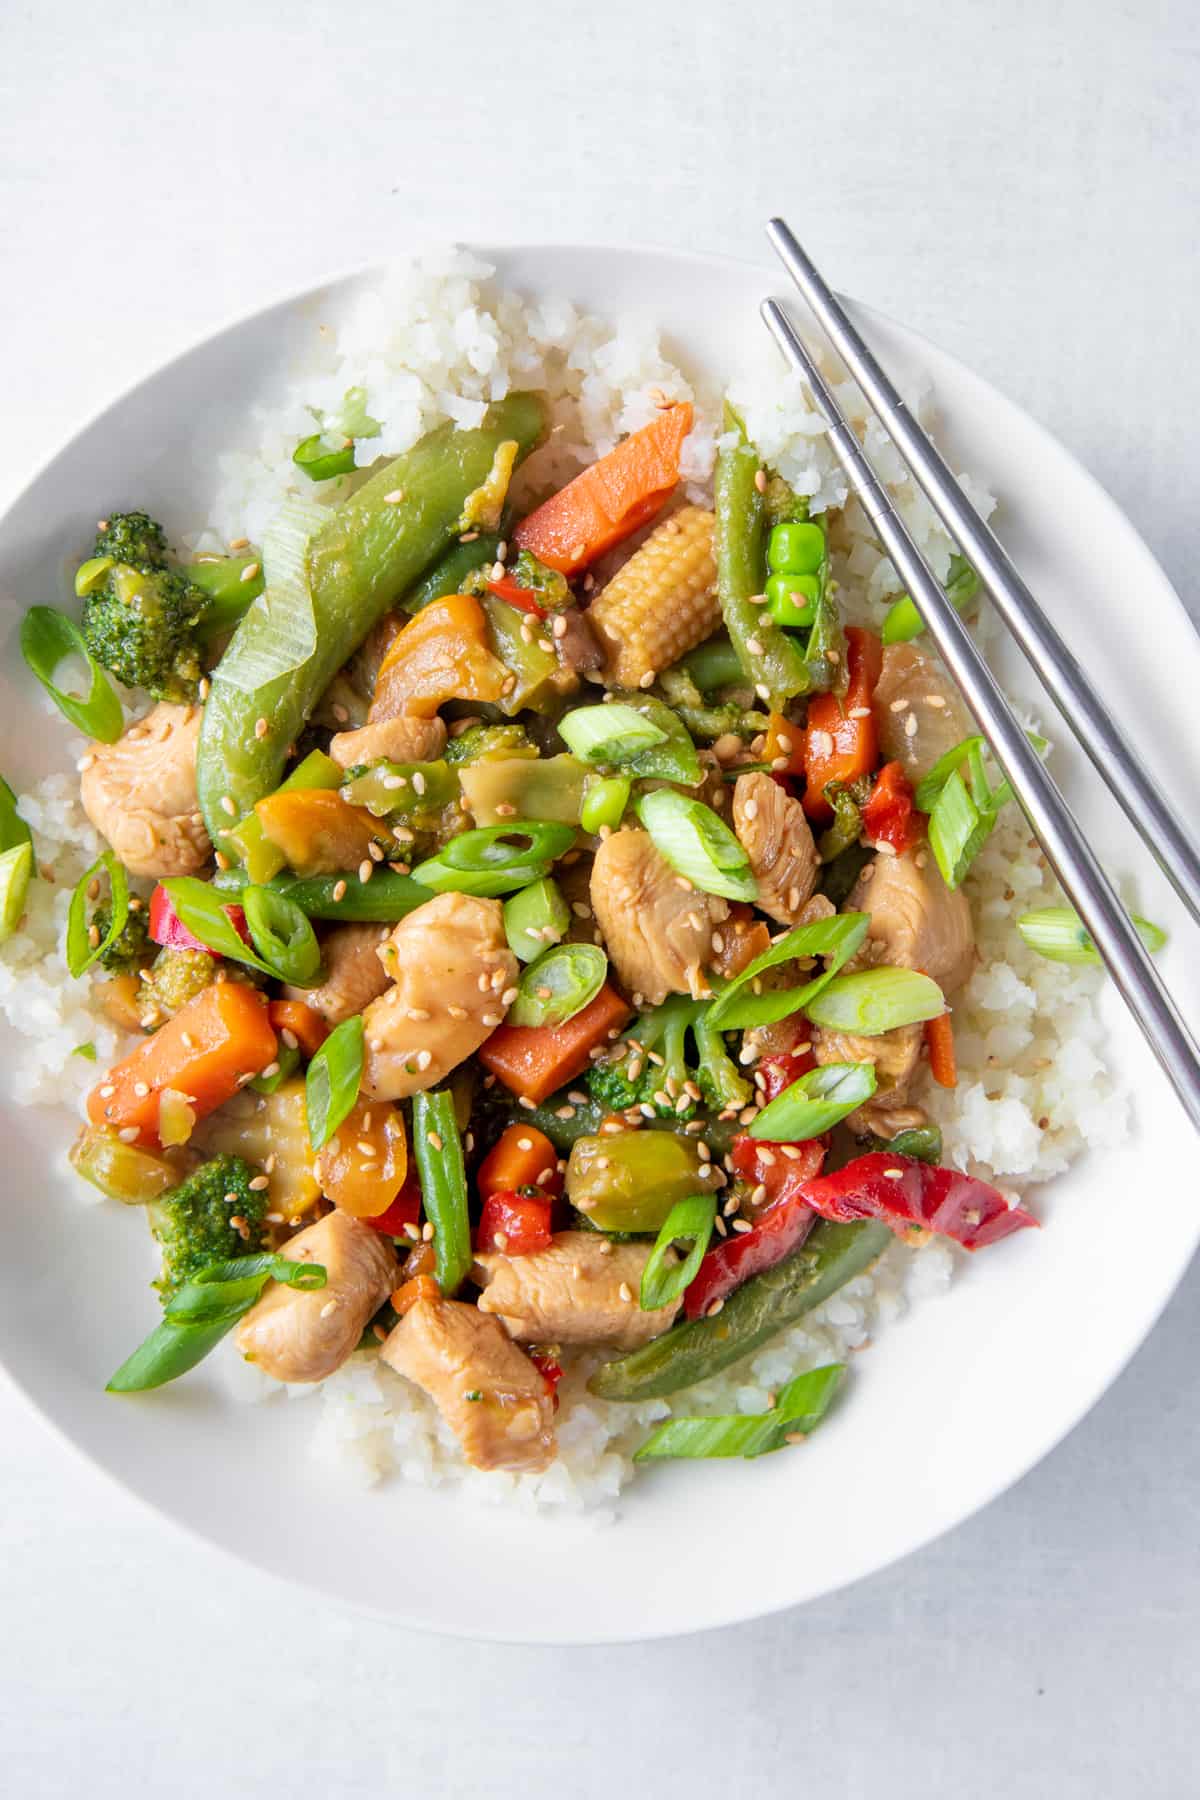 Healthy Chicken And Vegetable Stir-Fry Recipe: Easy Lunch Delight